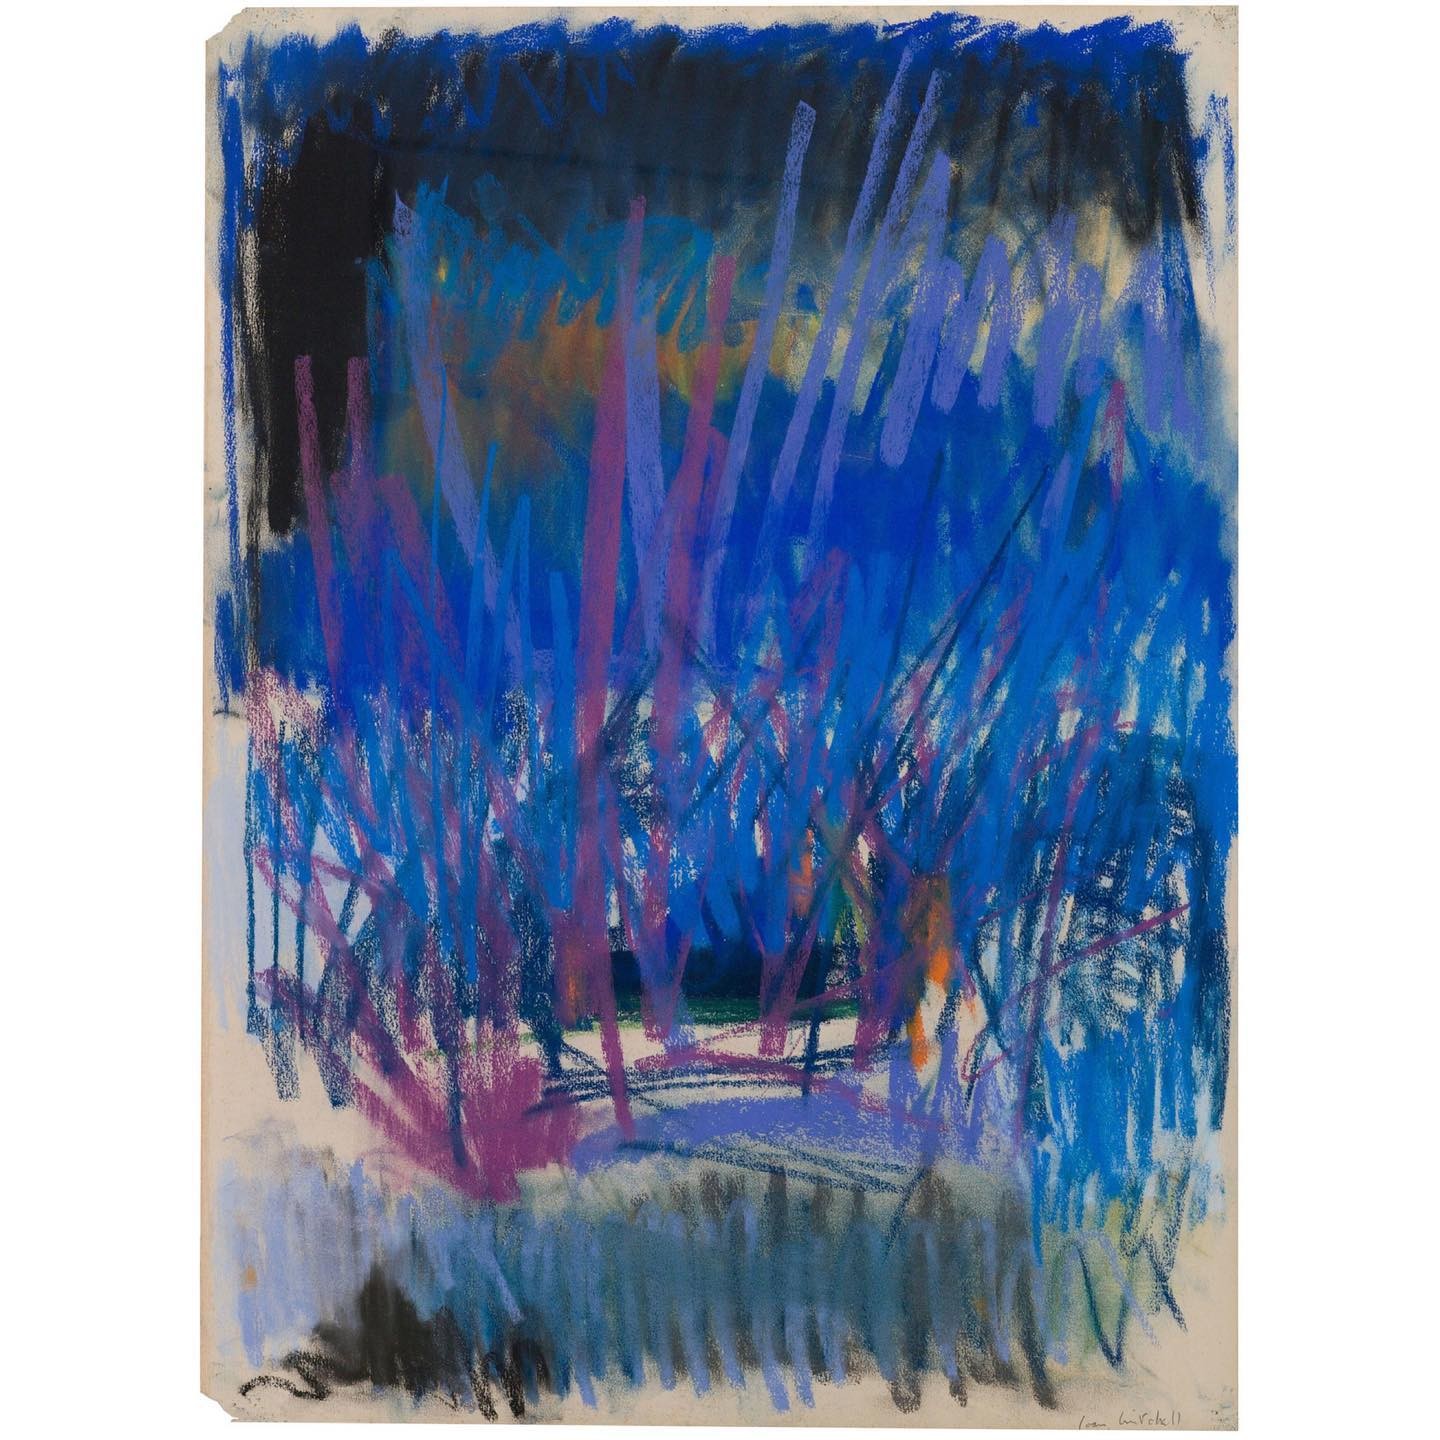 Joan Mitchell; Untitled, 1979, pastel on paper